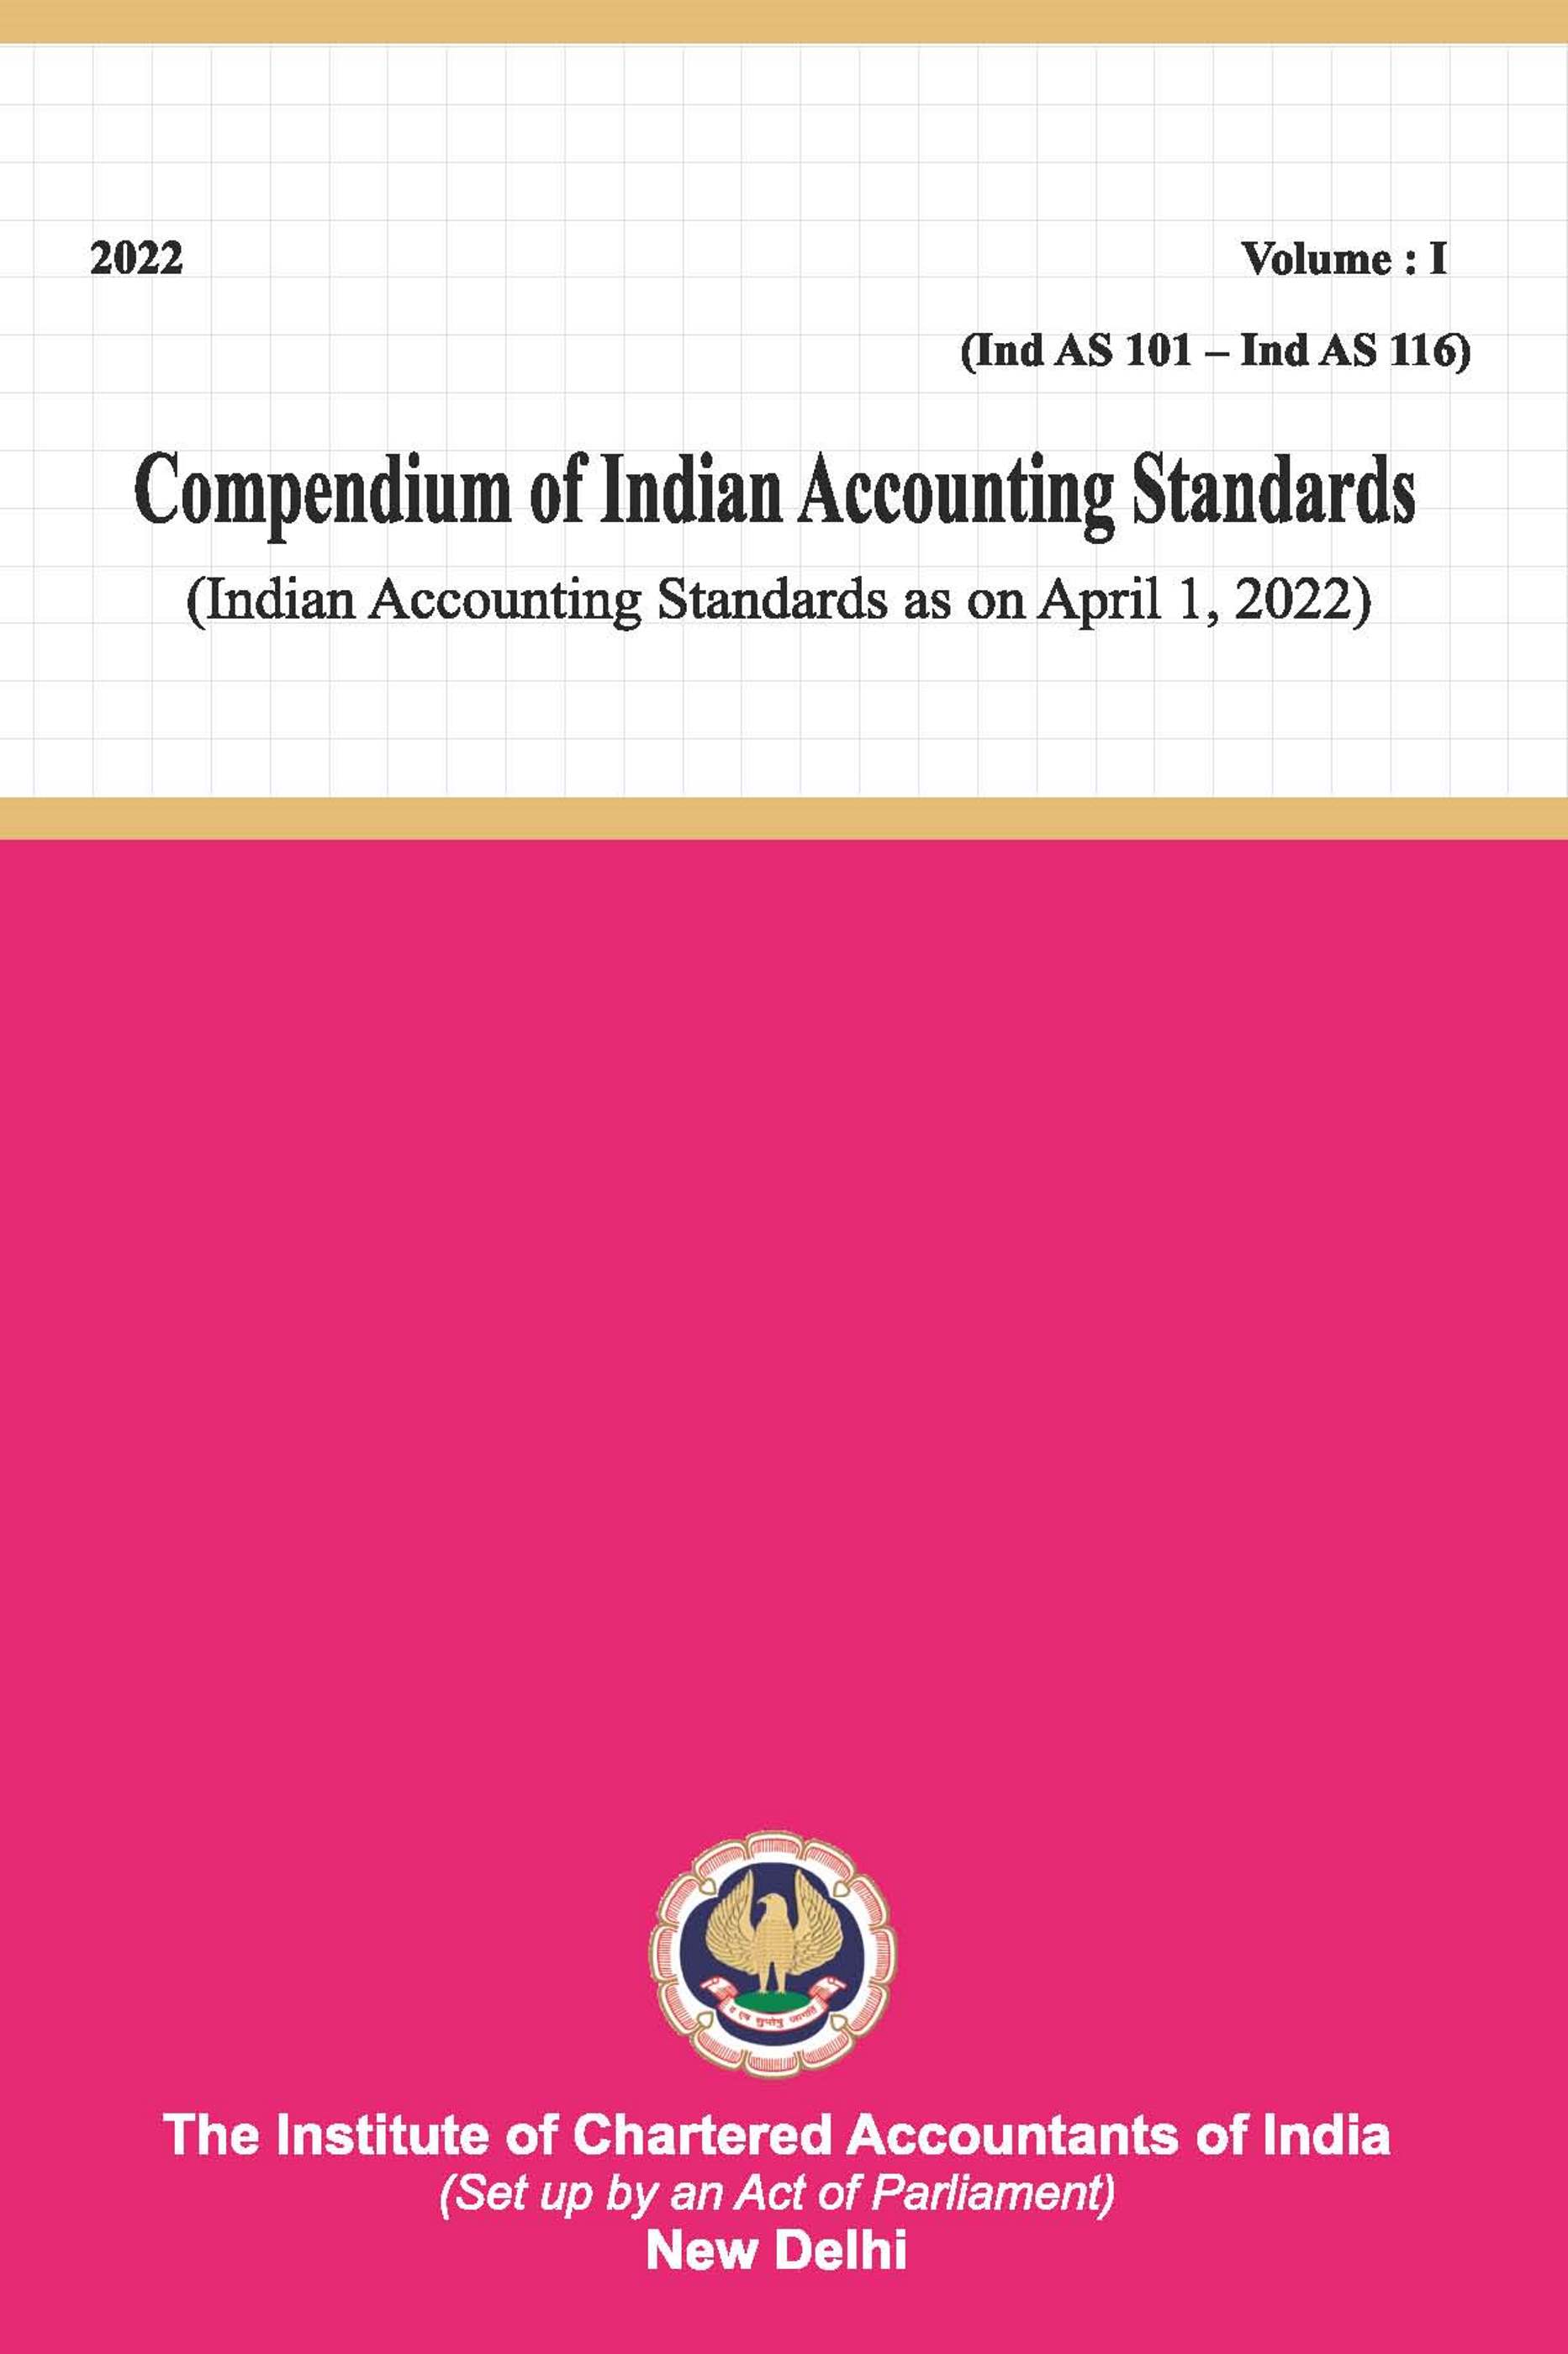 Compendium of Indian Accounting Standards (Indian Accounting Standards as on April 1, 2022) Volume: I&II